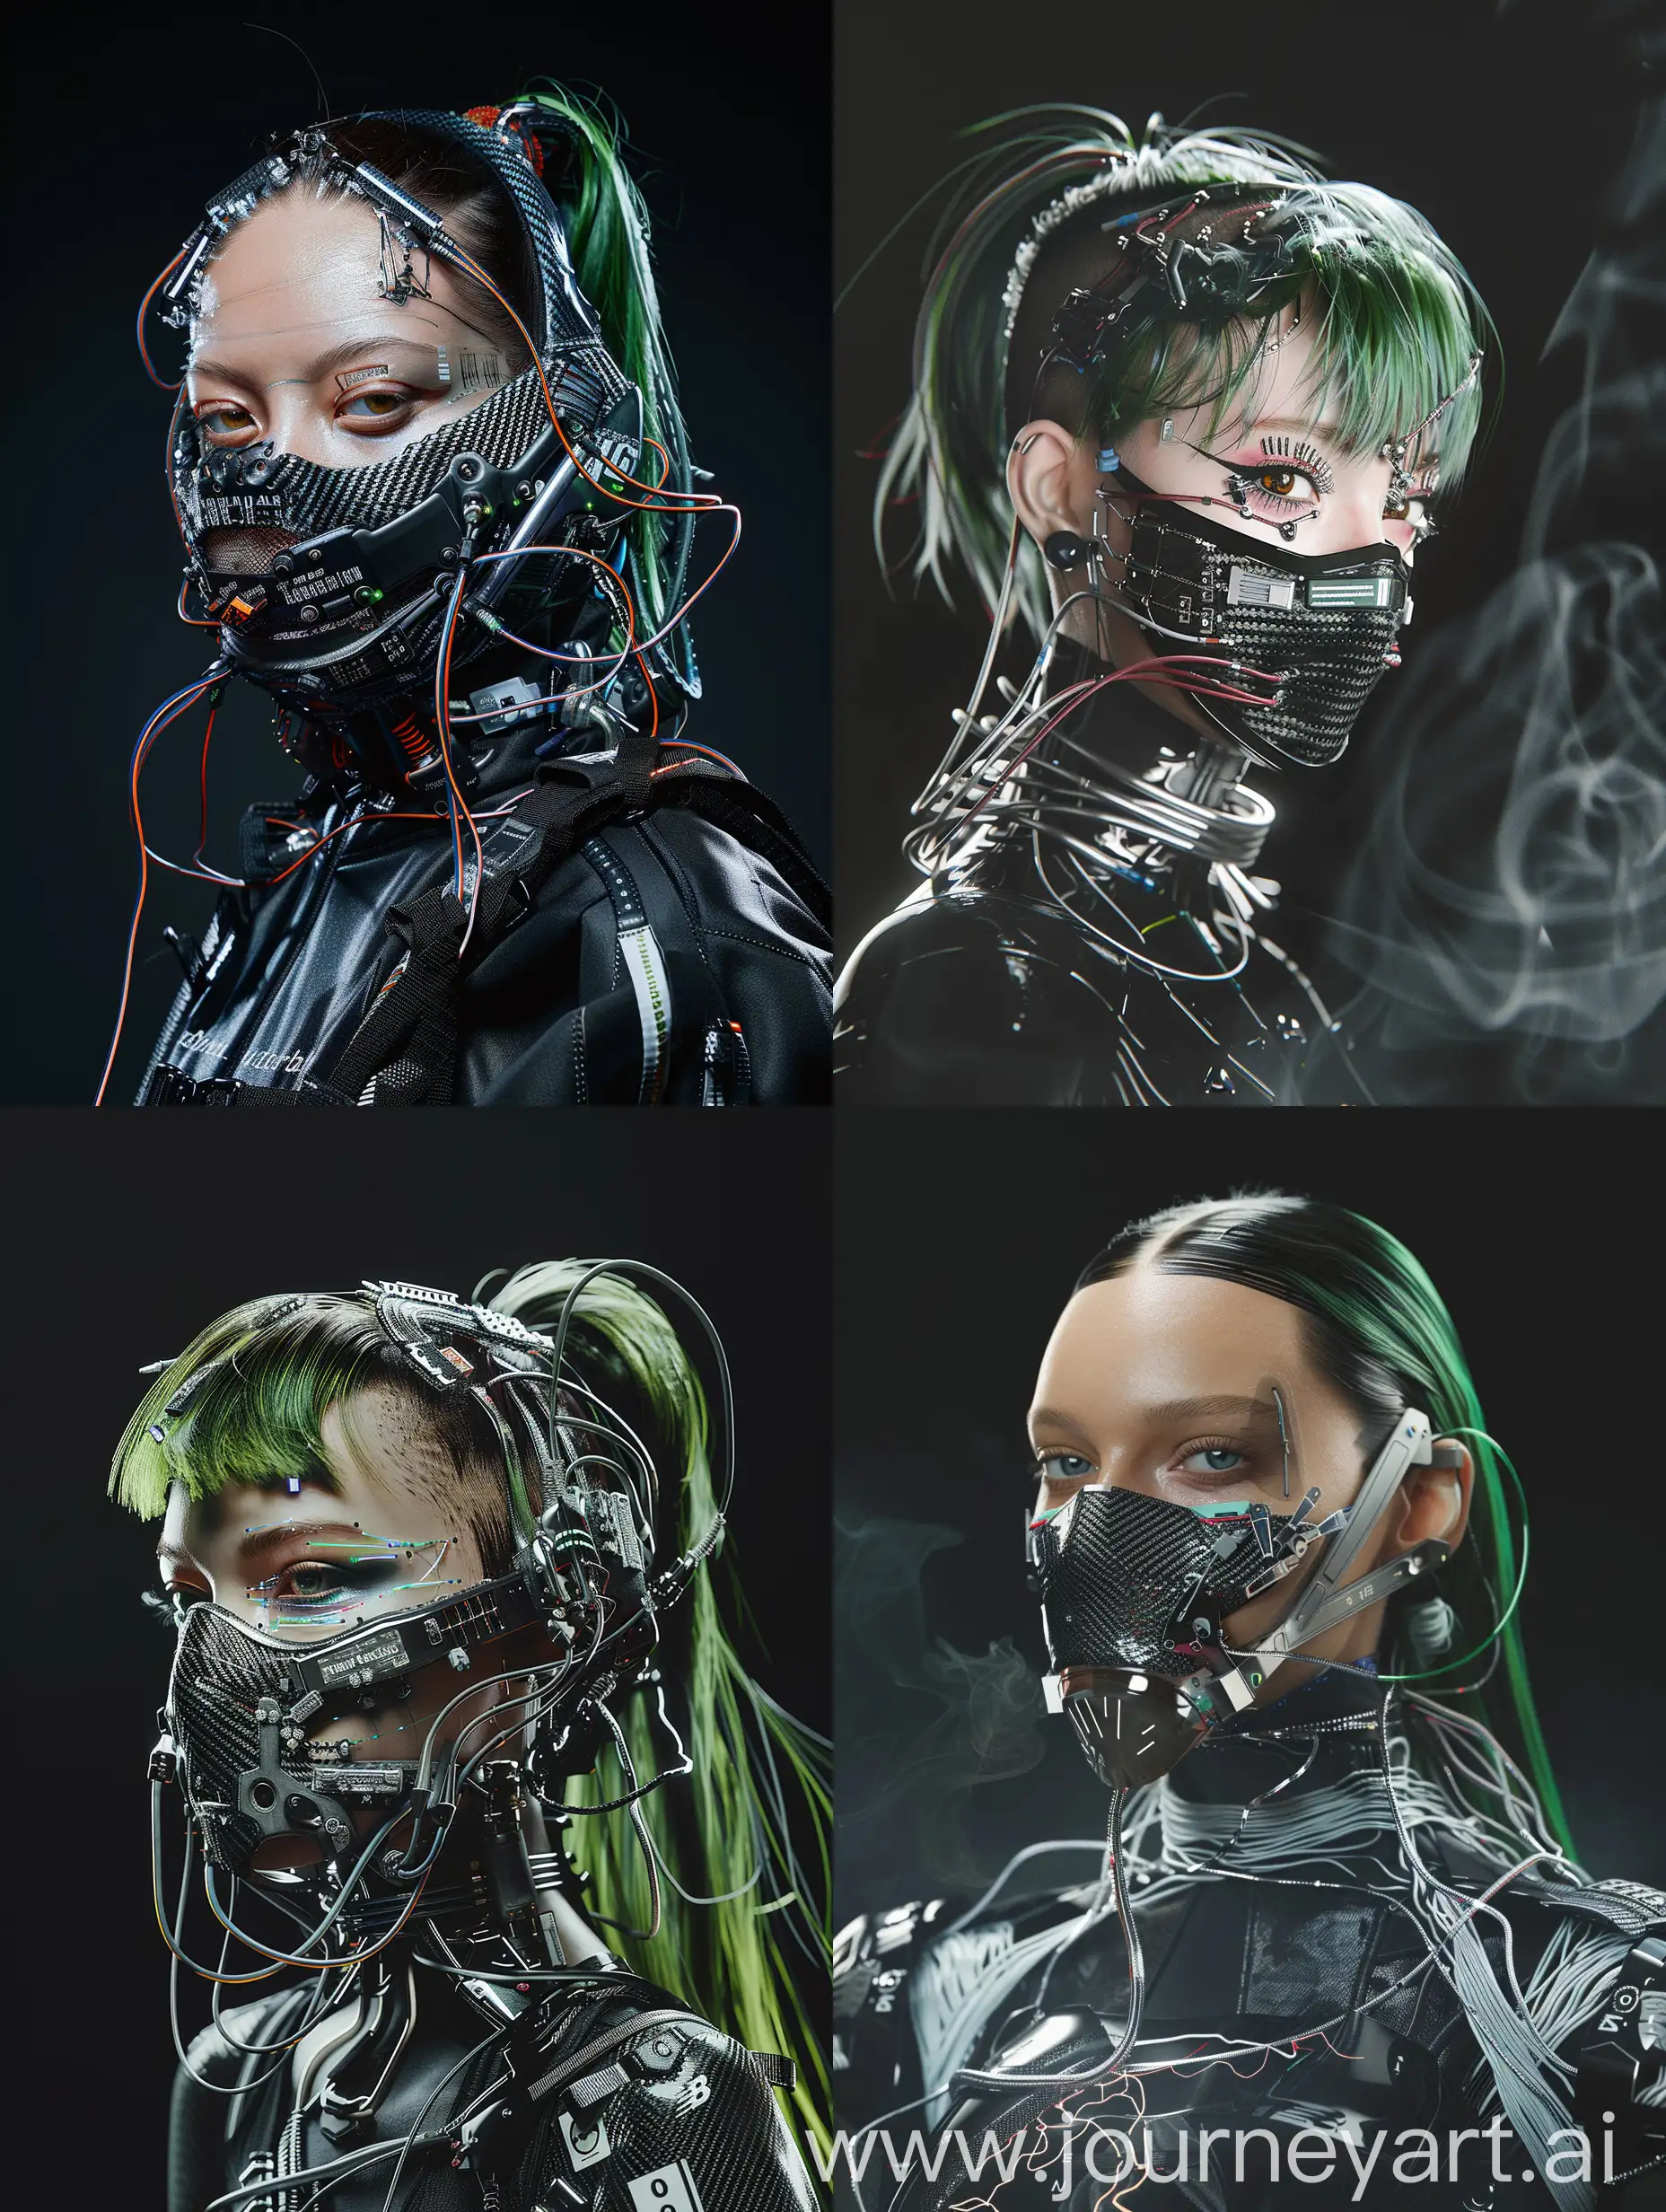 Futuristic-Cyberpunk-Character-with-Green-Hair-and-Cybernetic-Mask